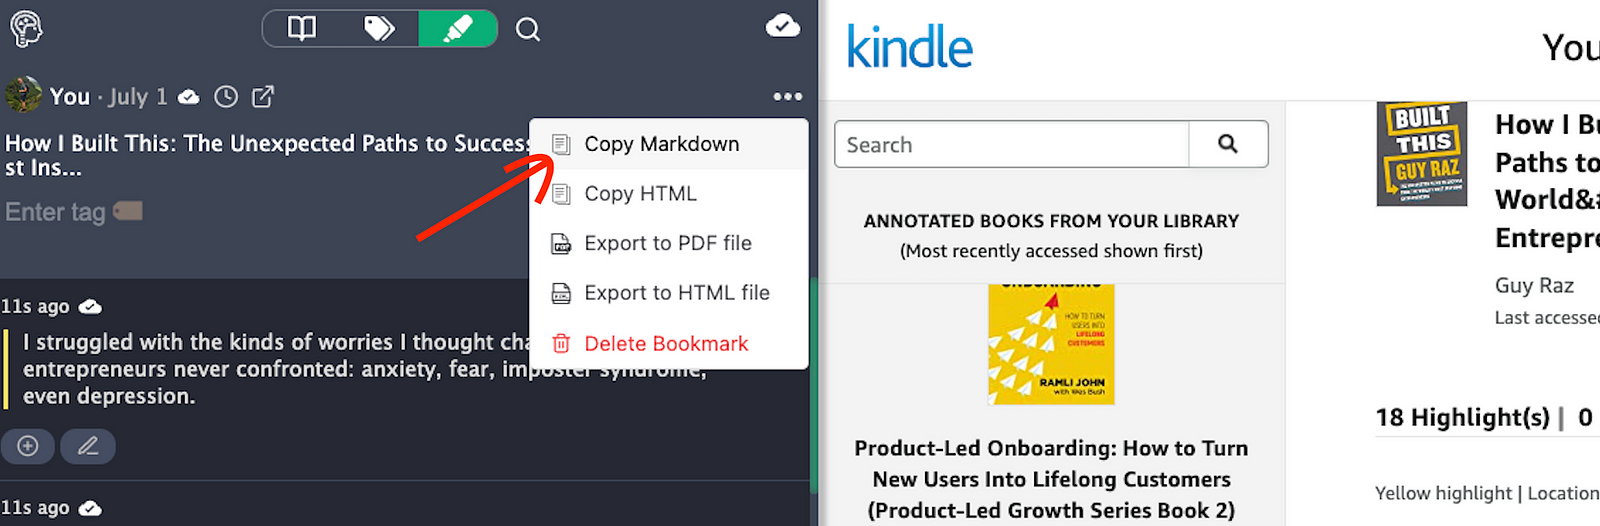 Copy highlights and notes to markdown